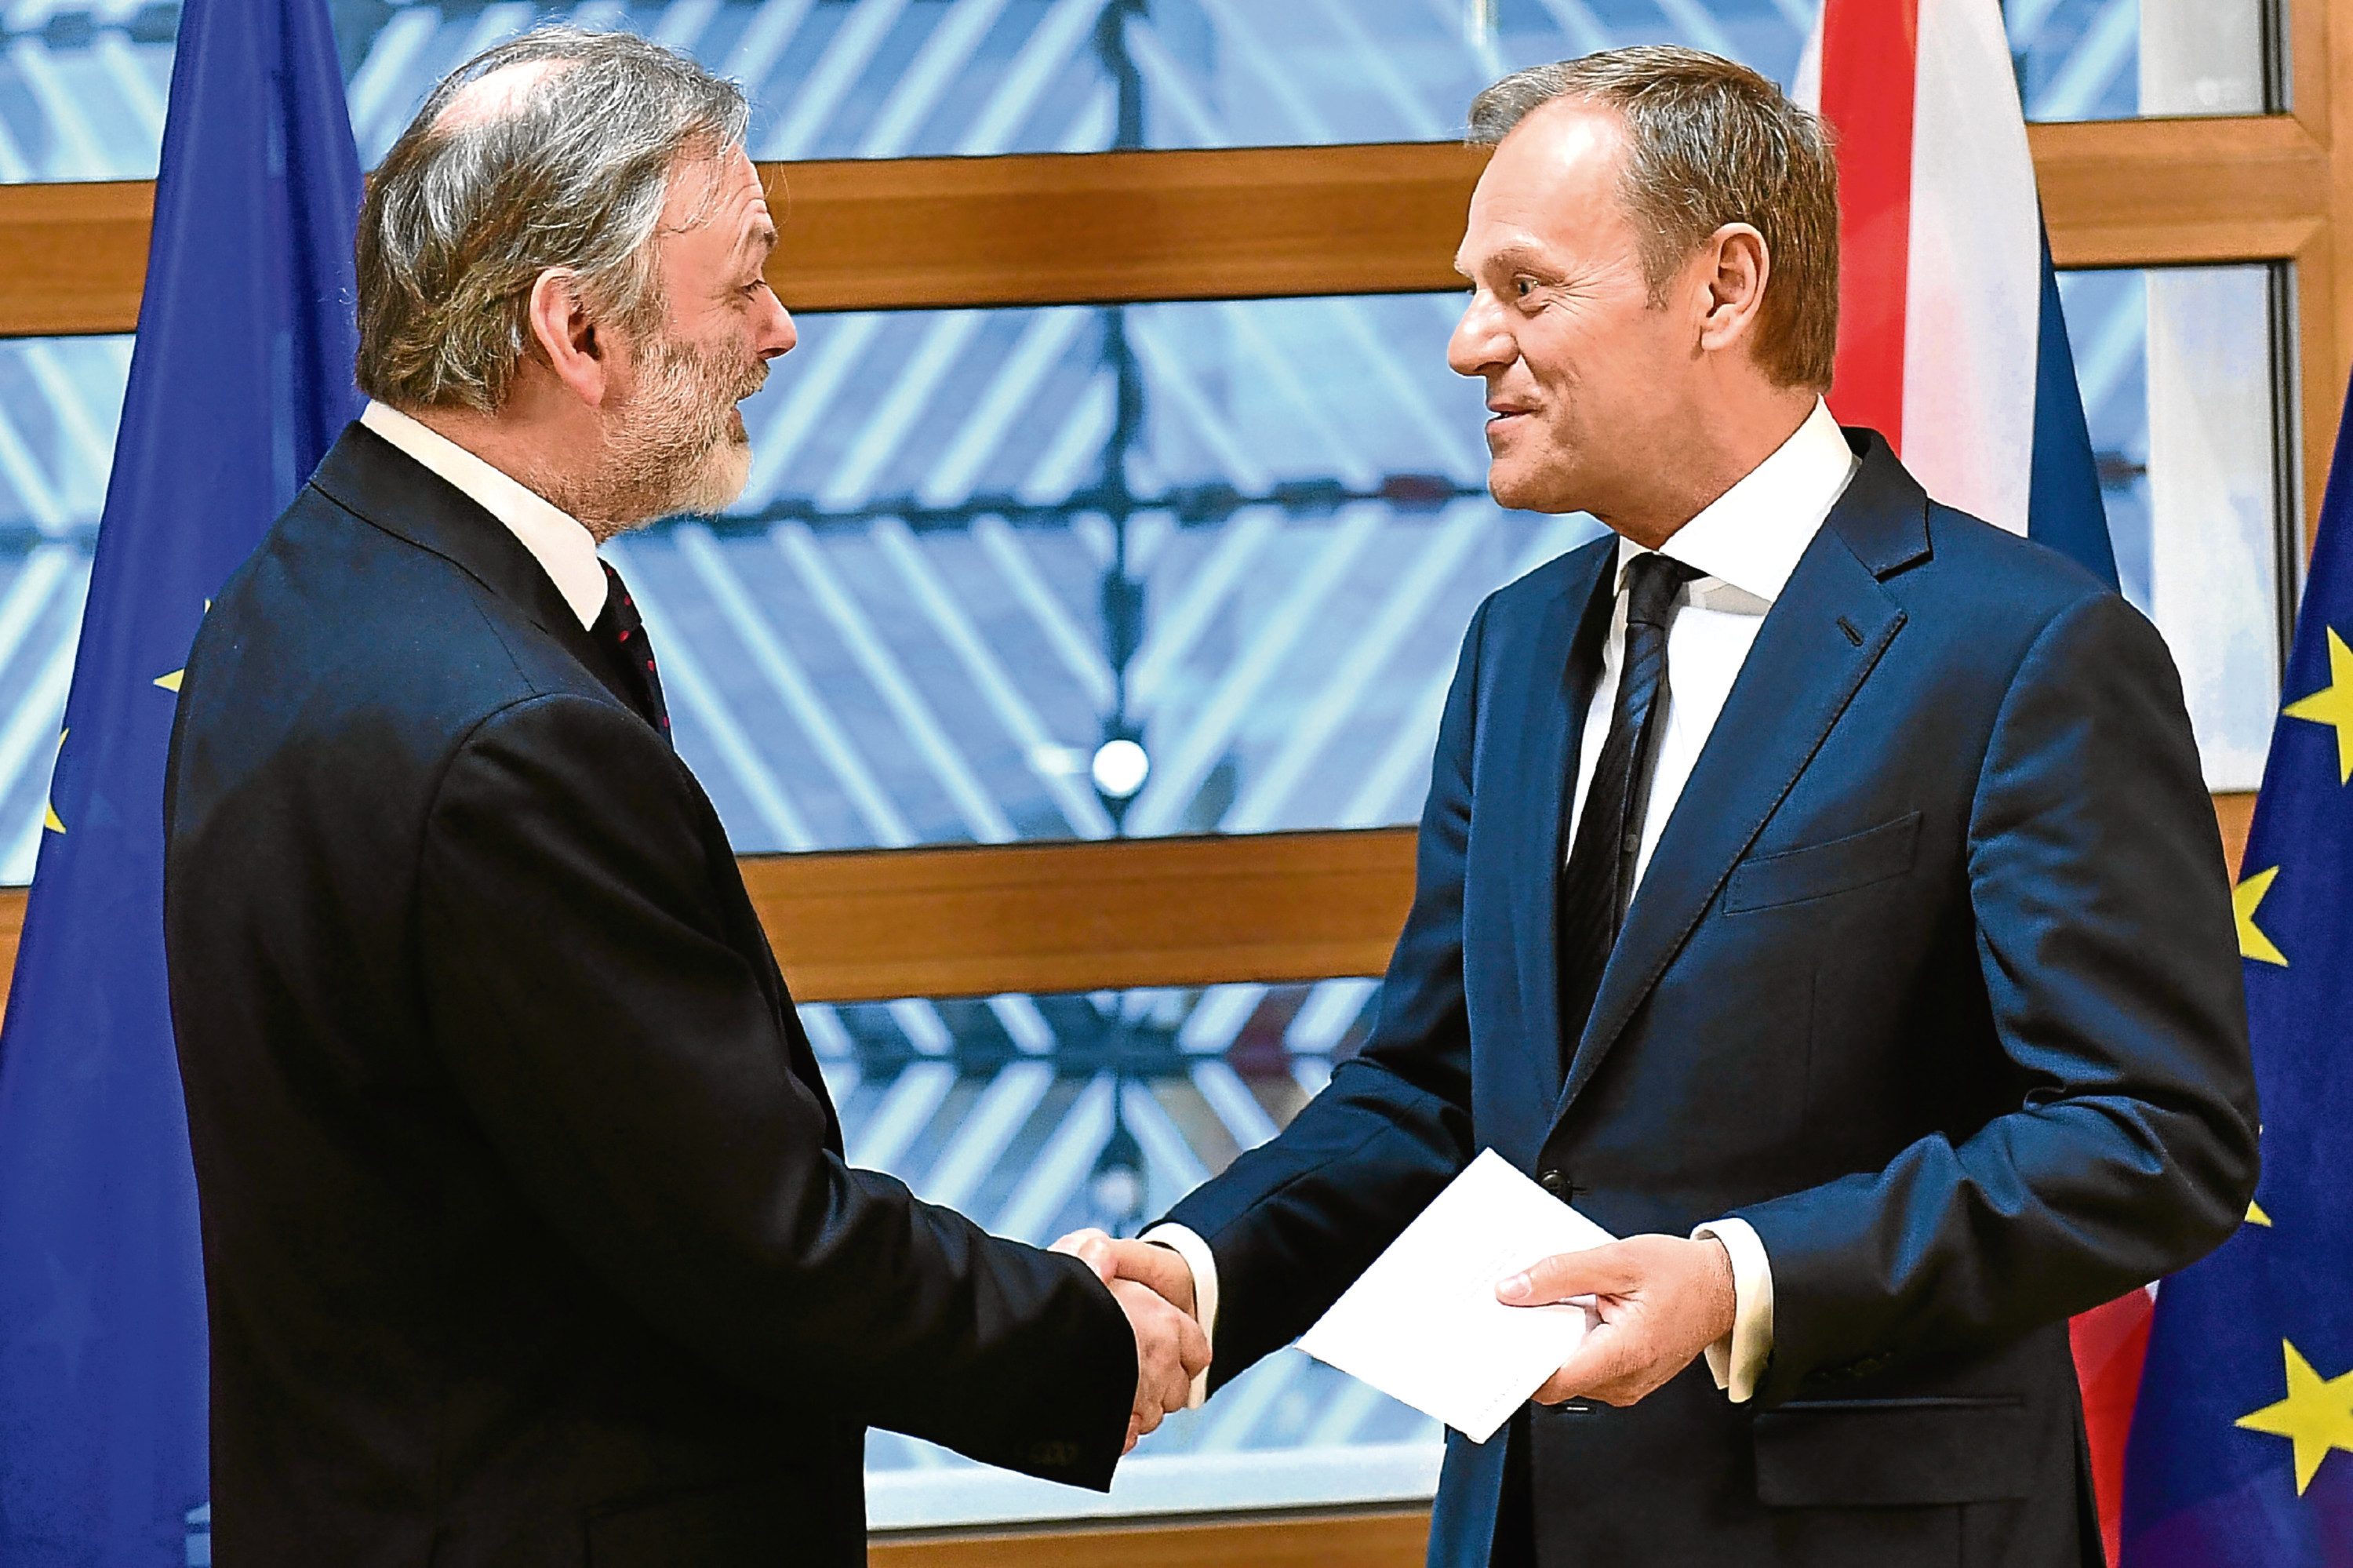 EU Council President Donald Tusk, right, shakes hands with UK Permanent Representative to the EU Tim Barrow after getting British Prime Minister Theresa May's formal notice to leave the bloc under Article 50 of the EU's Lisbon Treaty, in Brussels, Wednesday, March 29, 2017. (Emmanuel Dunand, Pool via AP)